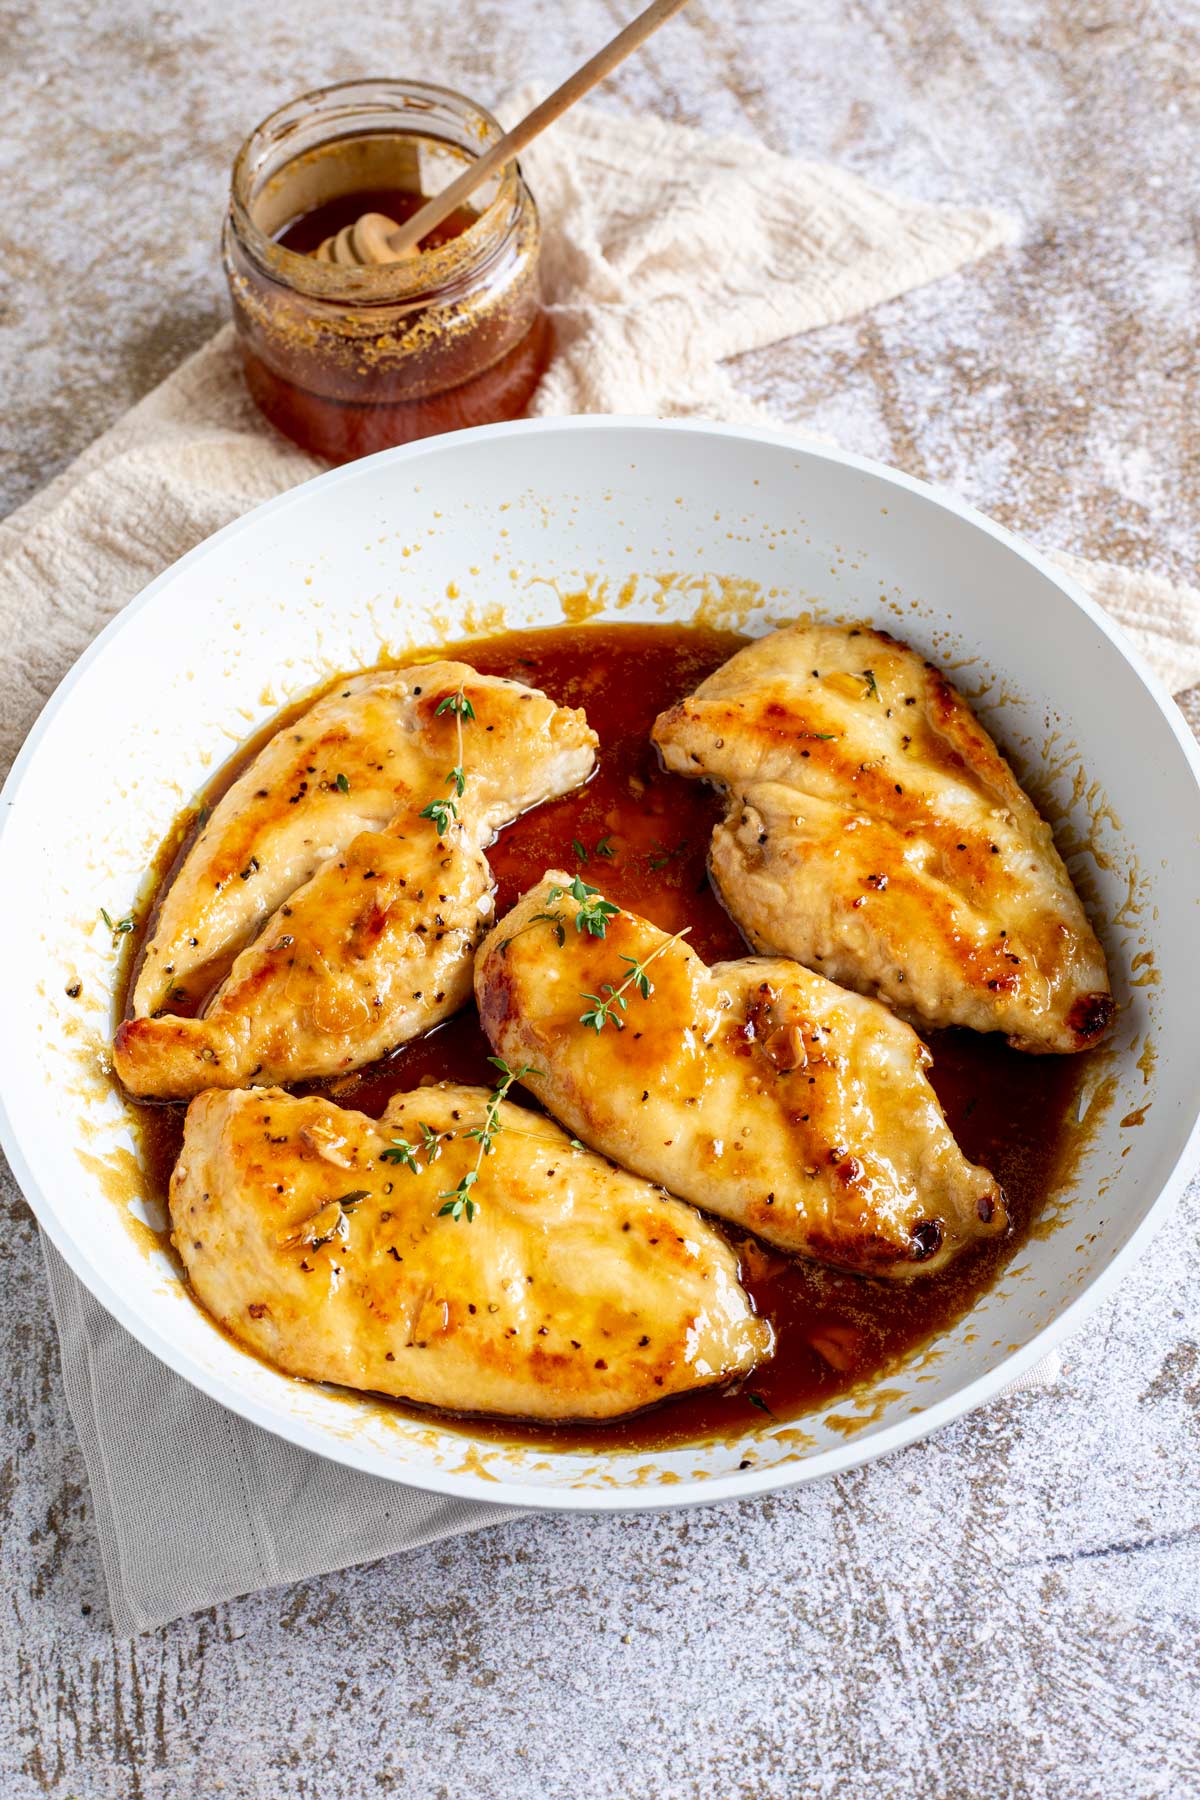 a skillet on a rustic wood table with 4 chicken breasts in a honey sauce